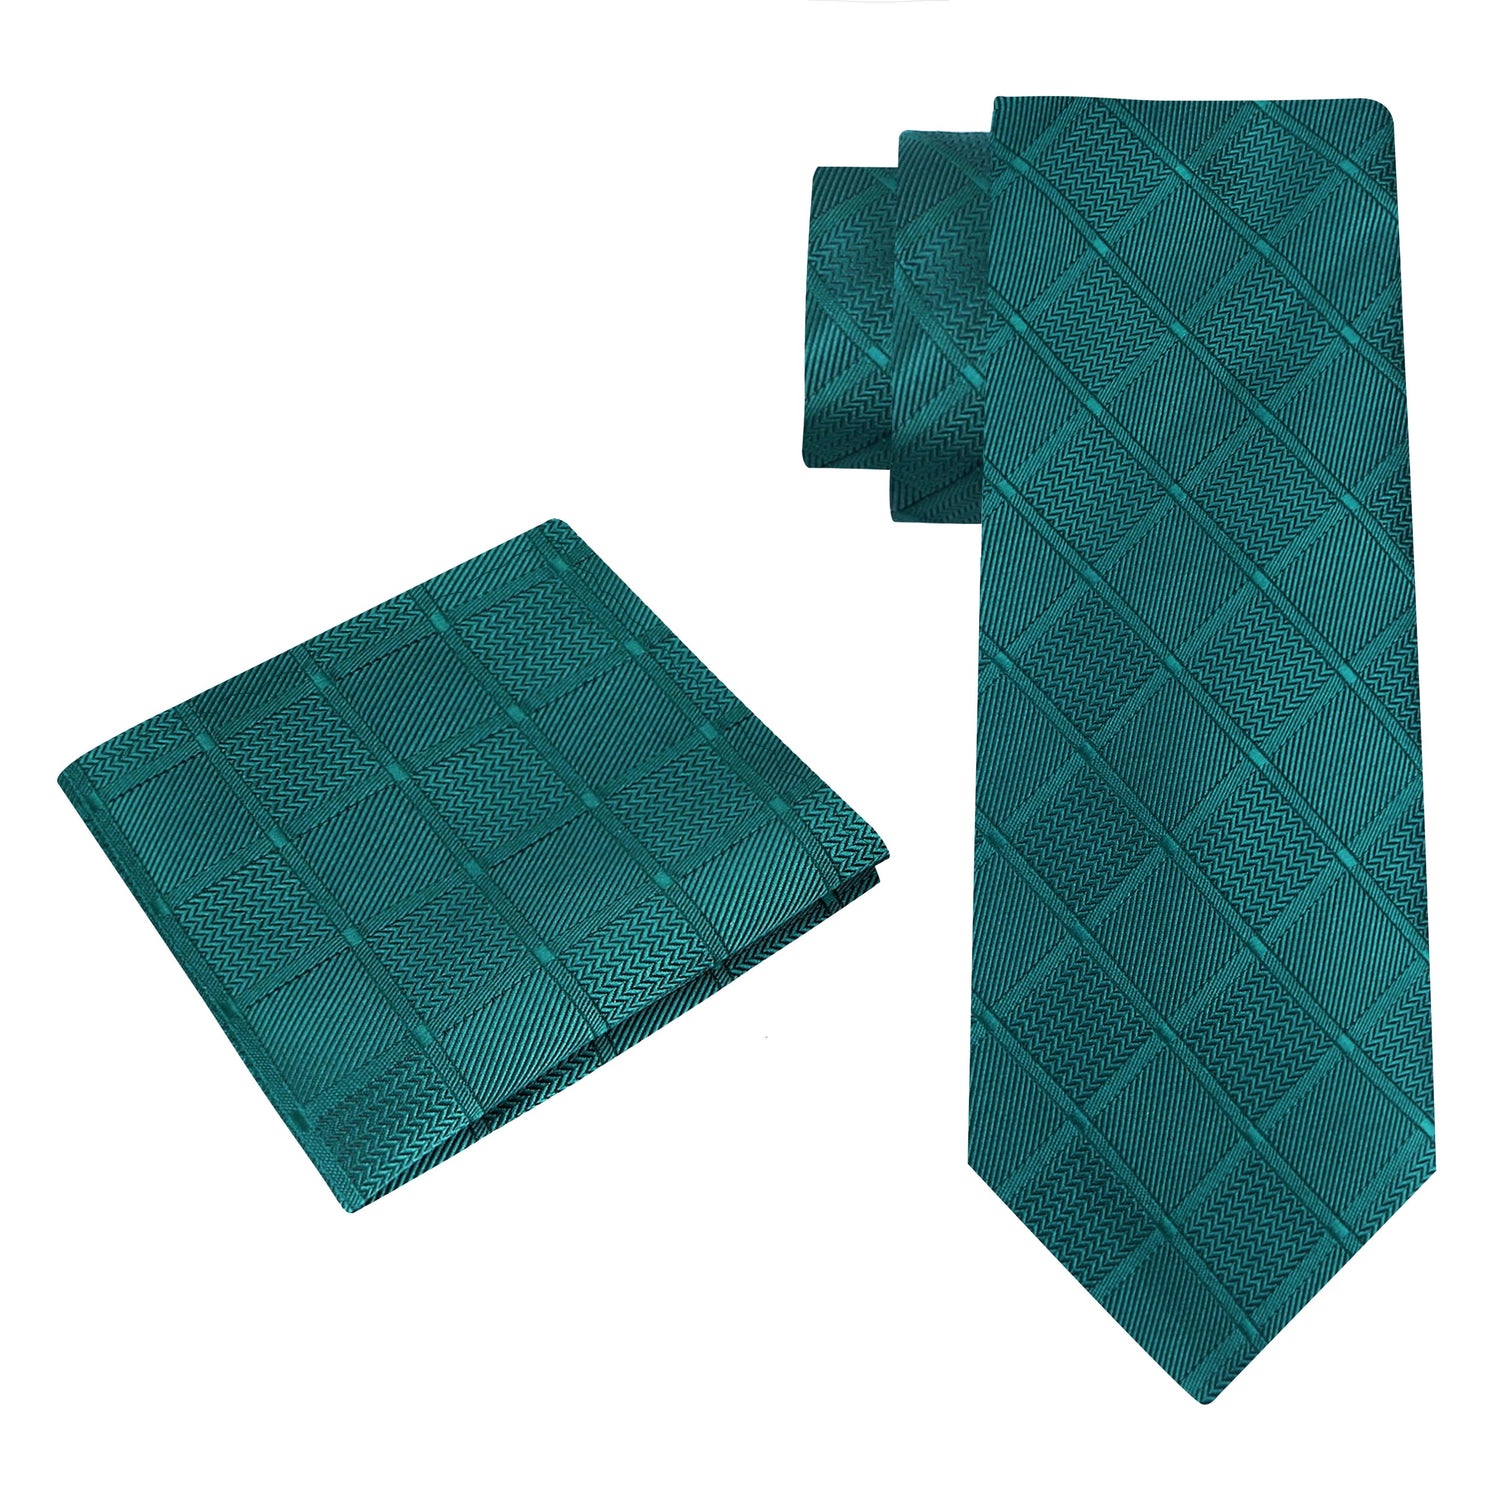 Alt View: A Green With Geometric Texture Pattern Silk Necktie, Matching Pocket Square